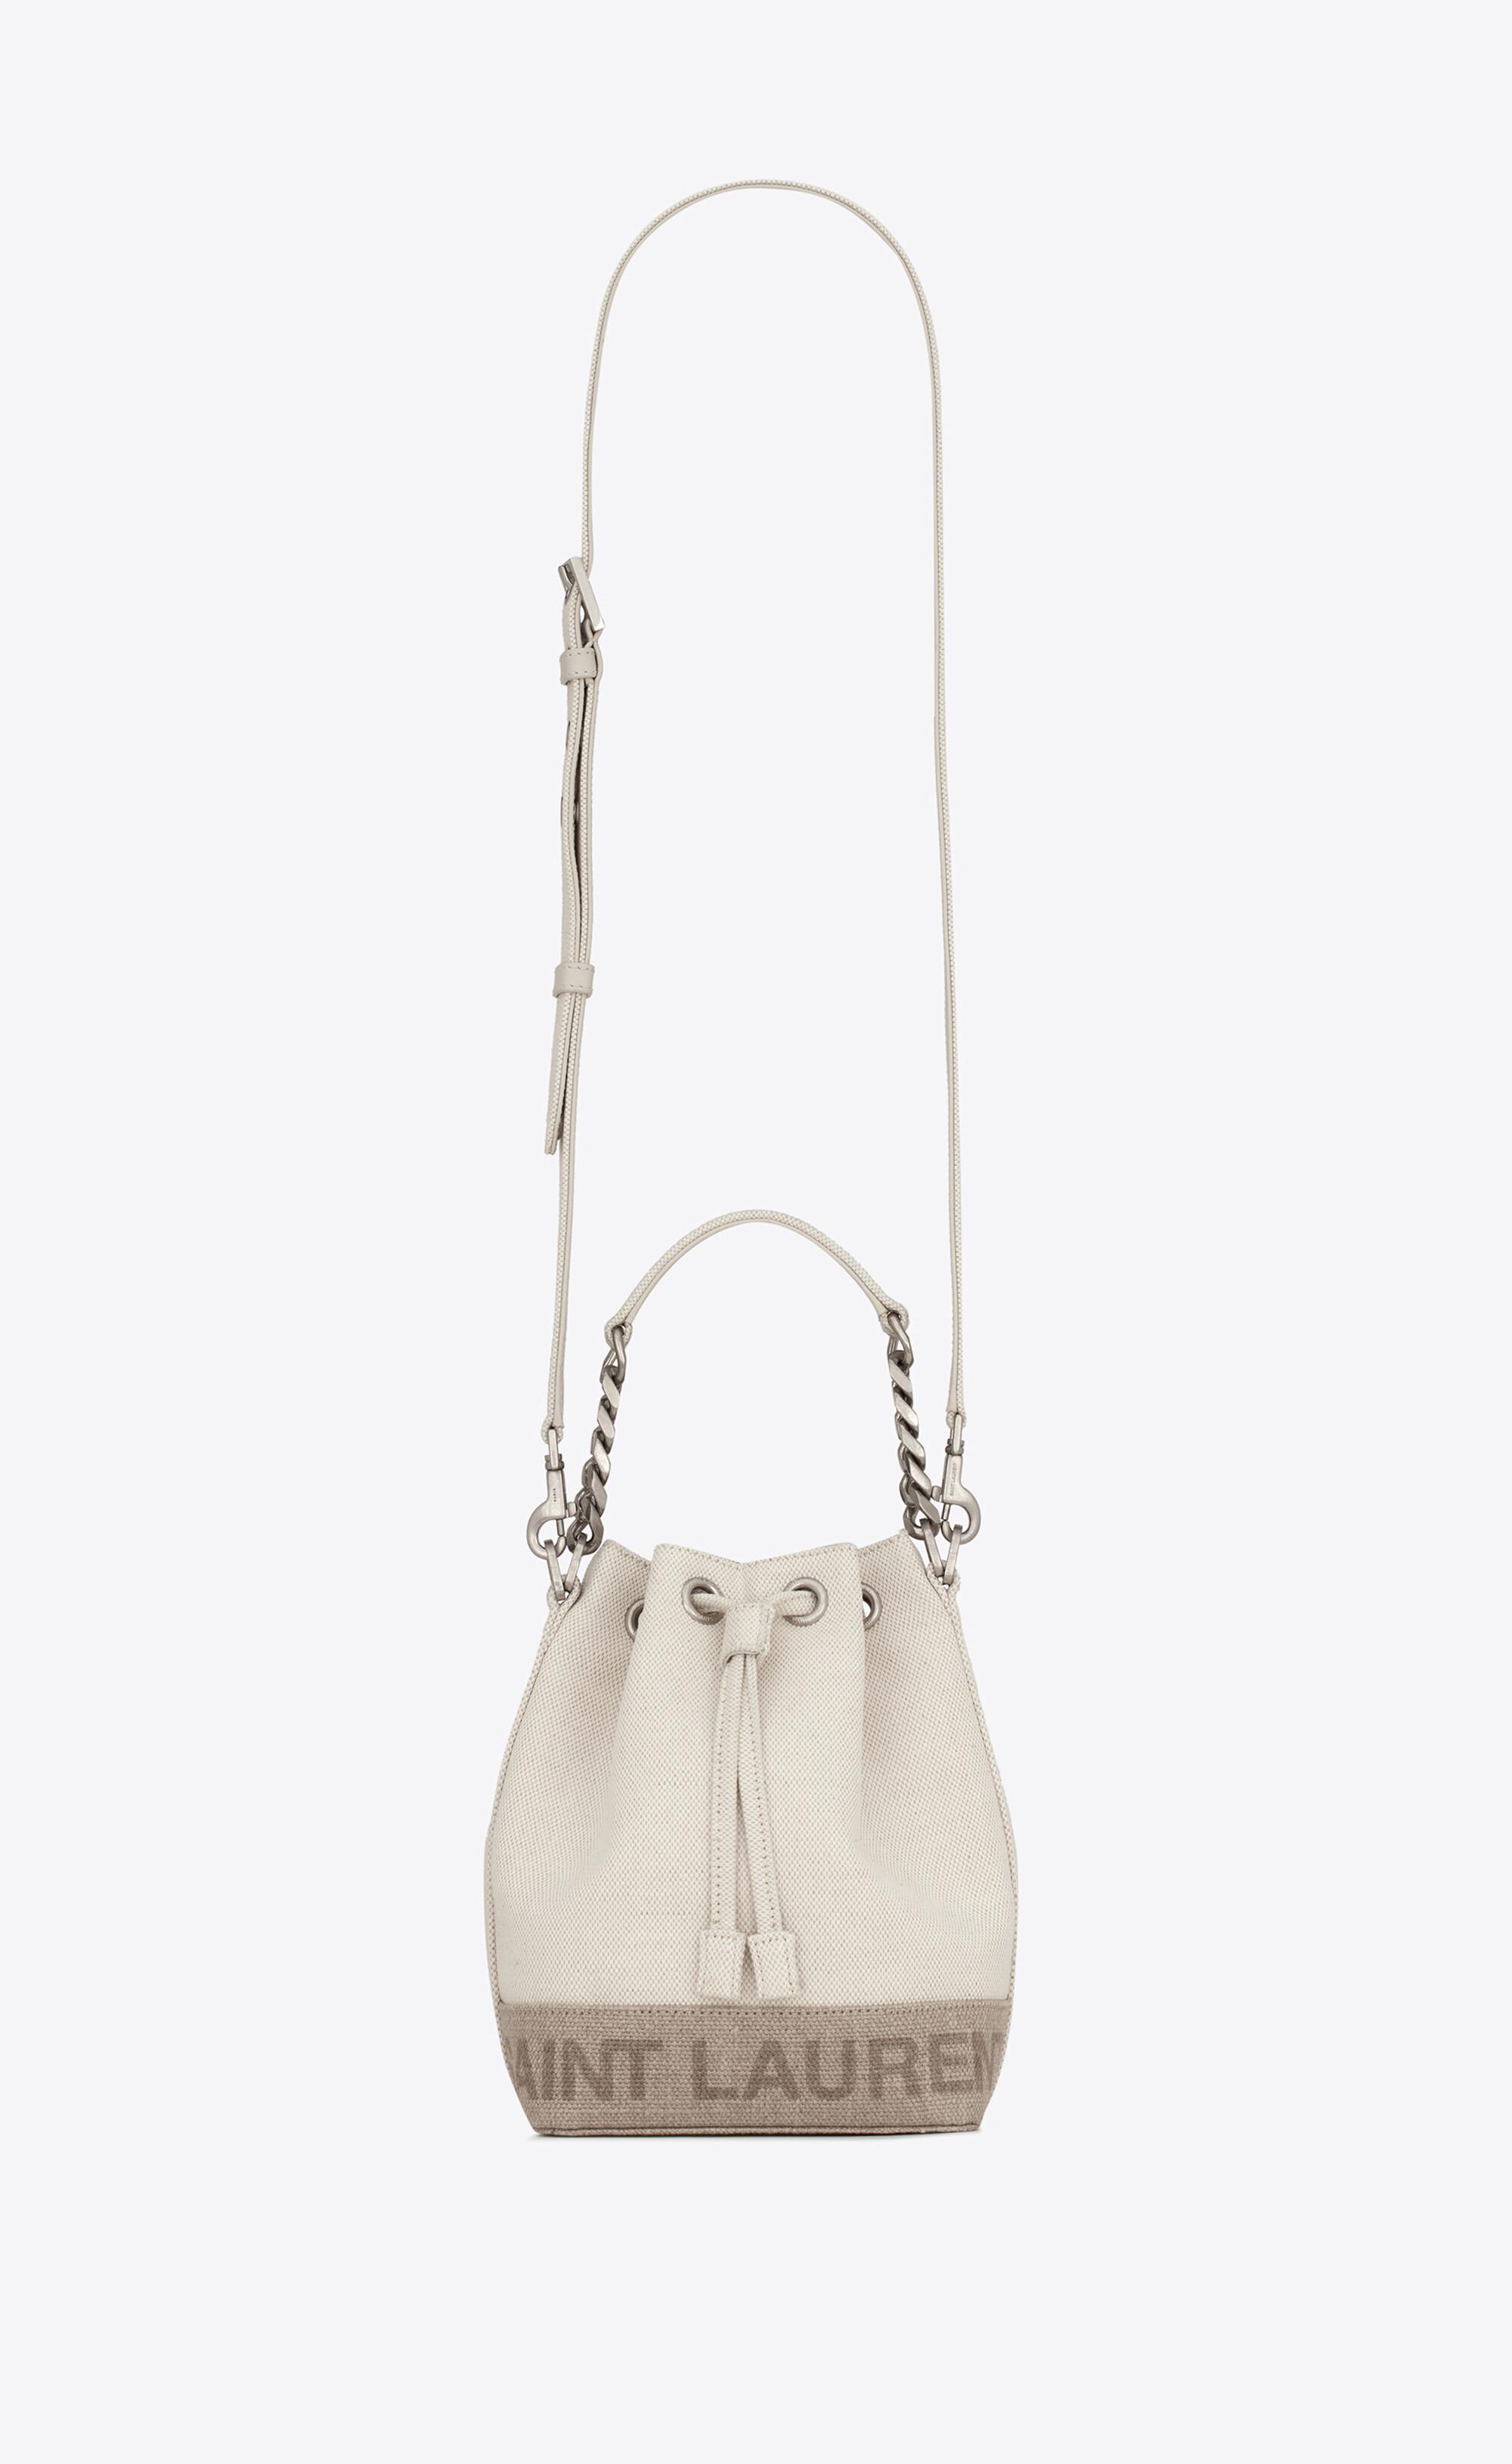 Saint Laurent Rive Gauche Mini Bucket Bag In Canvas And Leather in White